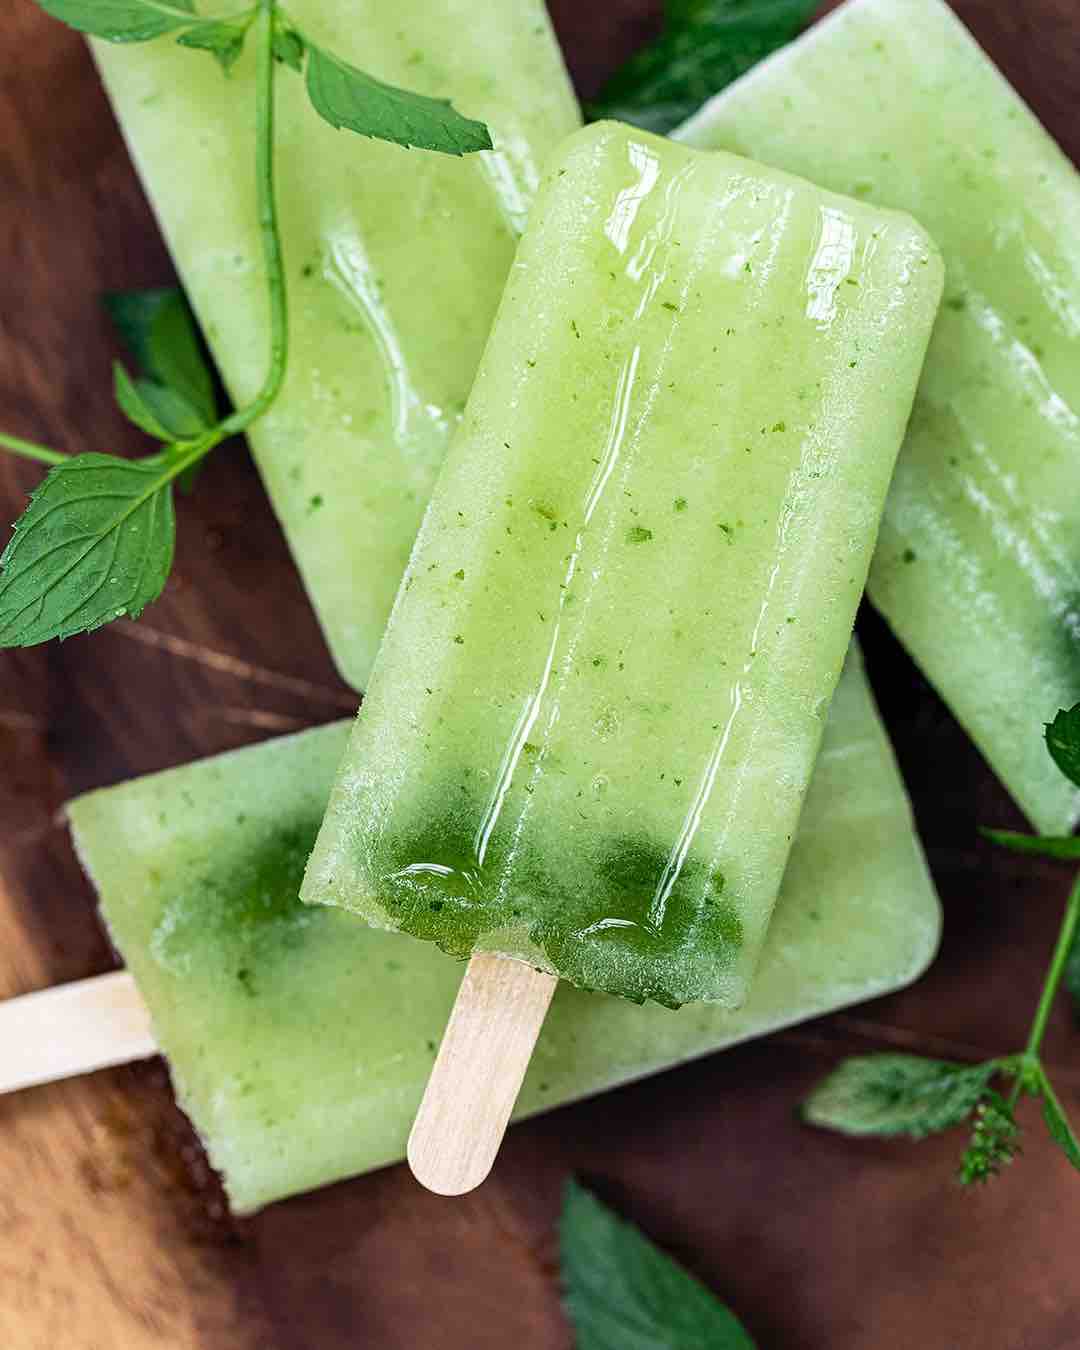 These Green Pops Are One Of The St Patrick's Day Cocktail Recipes For Home Entertaining